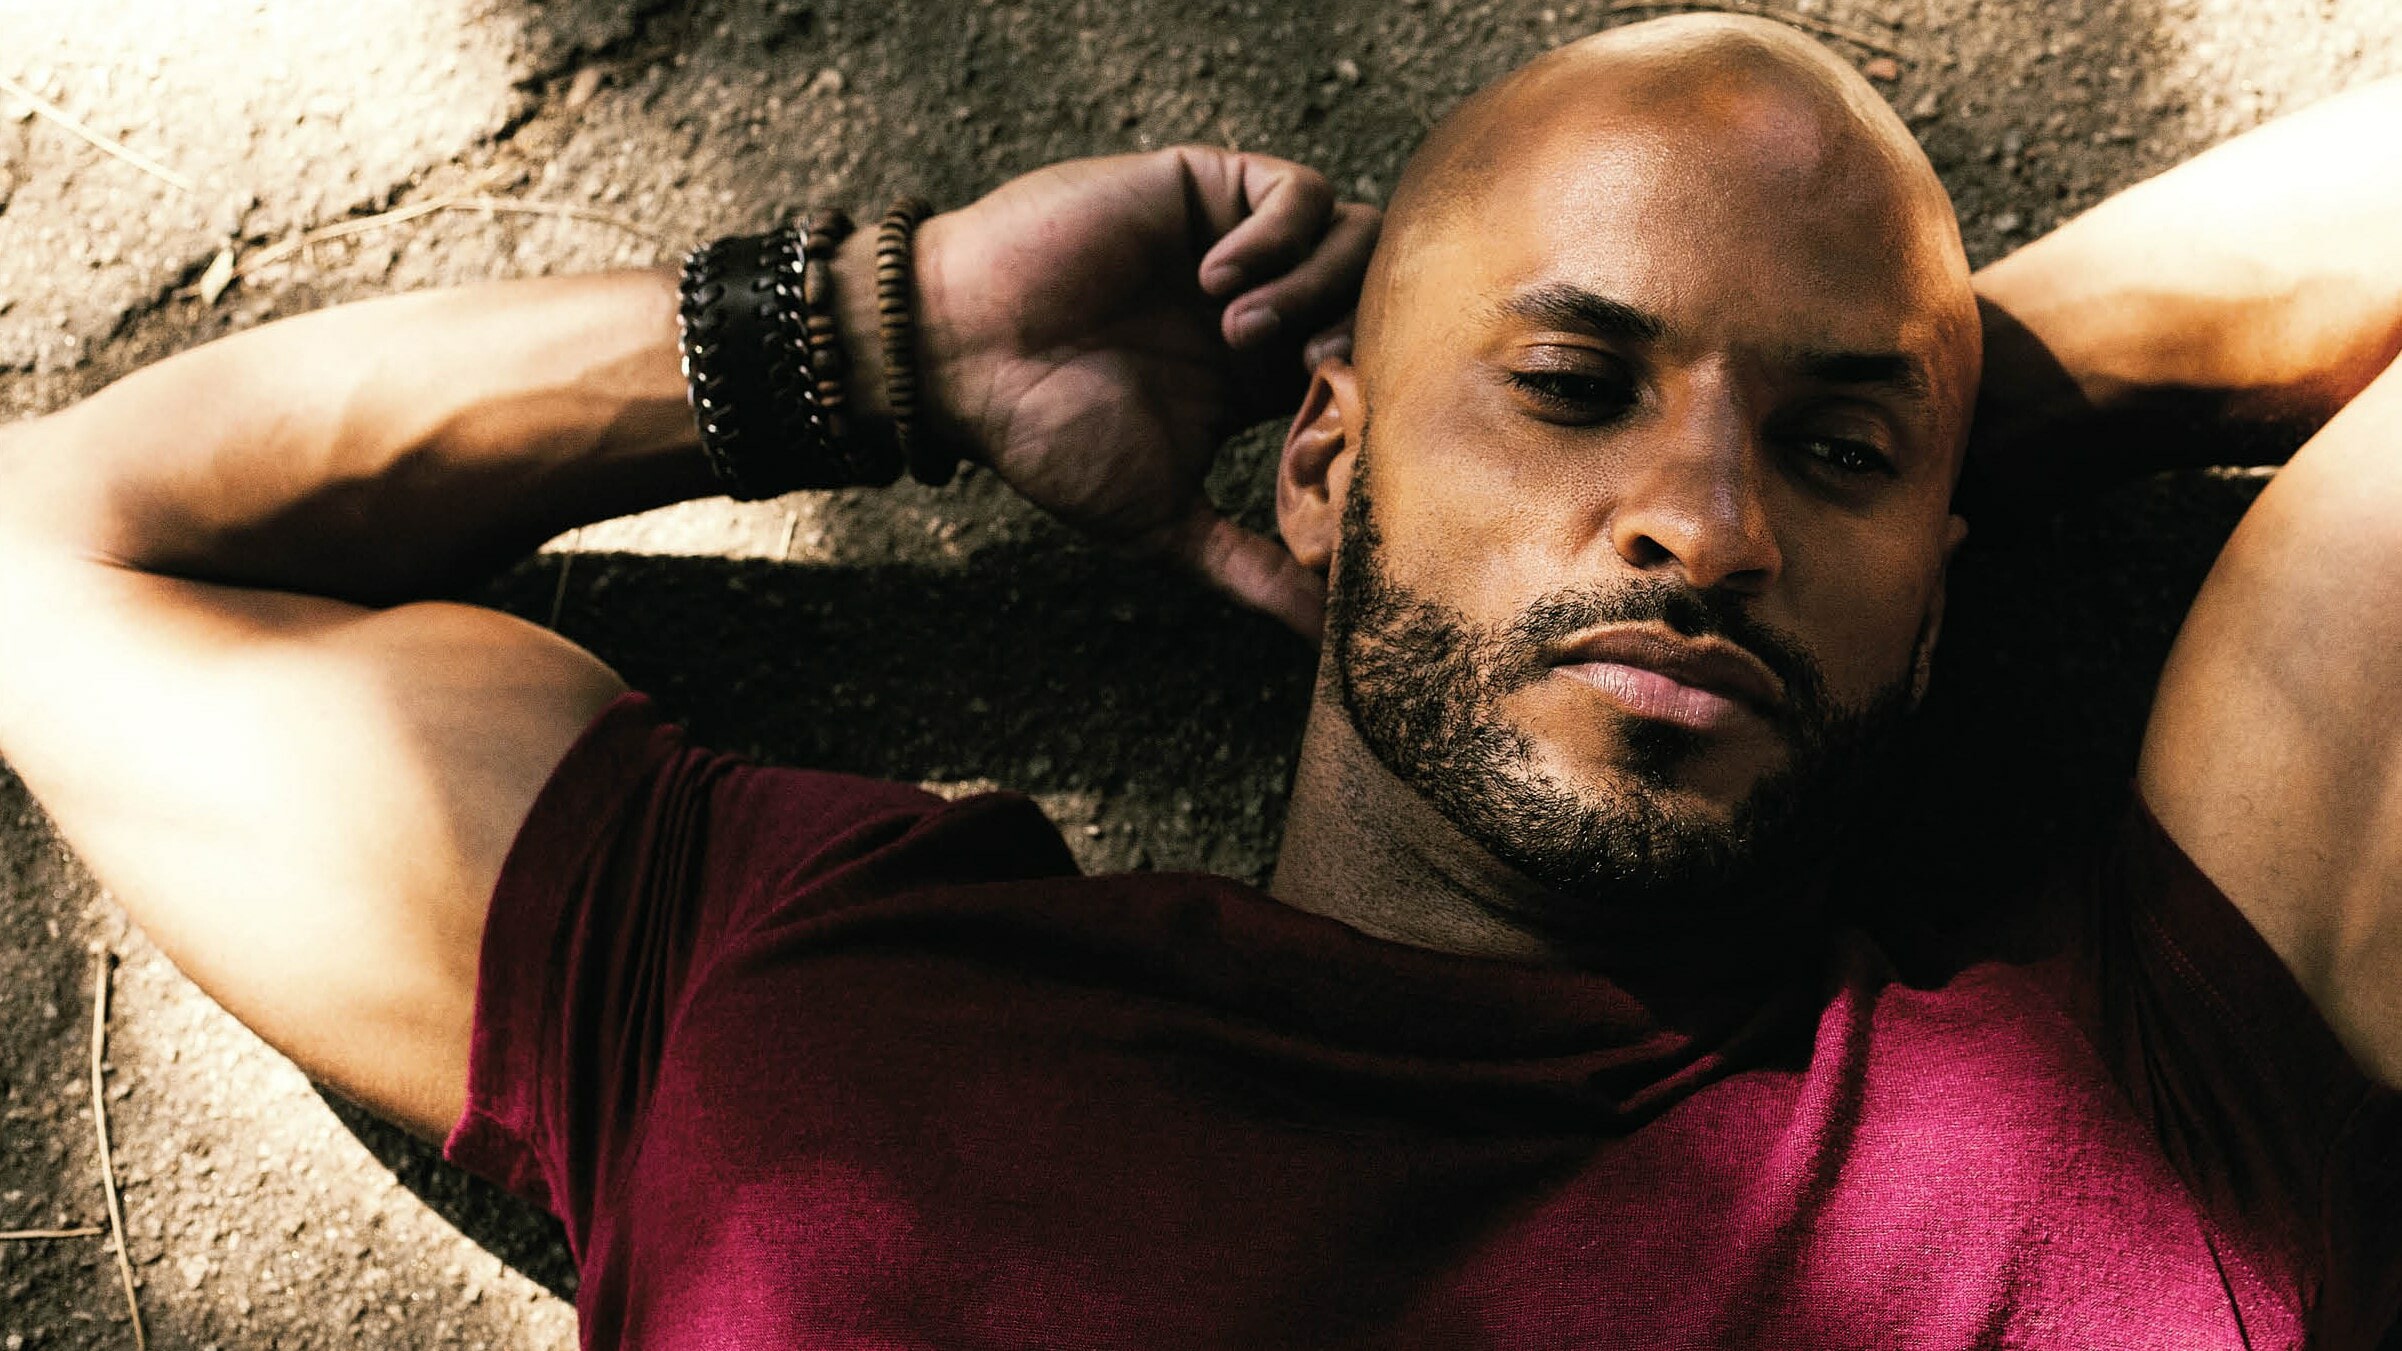 Ricky Whittle, HD wallpapers, 7wallpapers, Movies, 2410x1360 HD Desktop